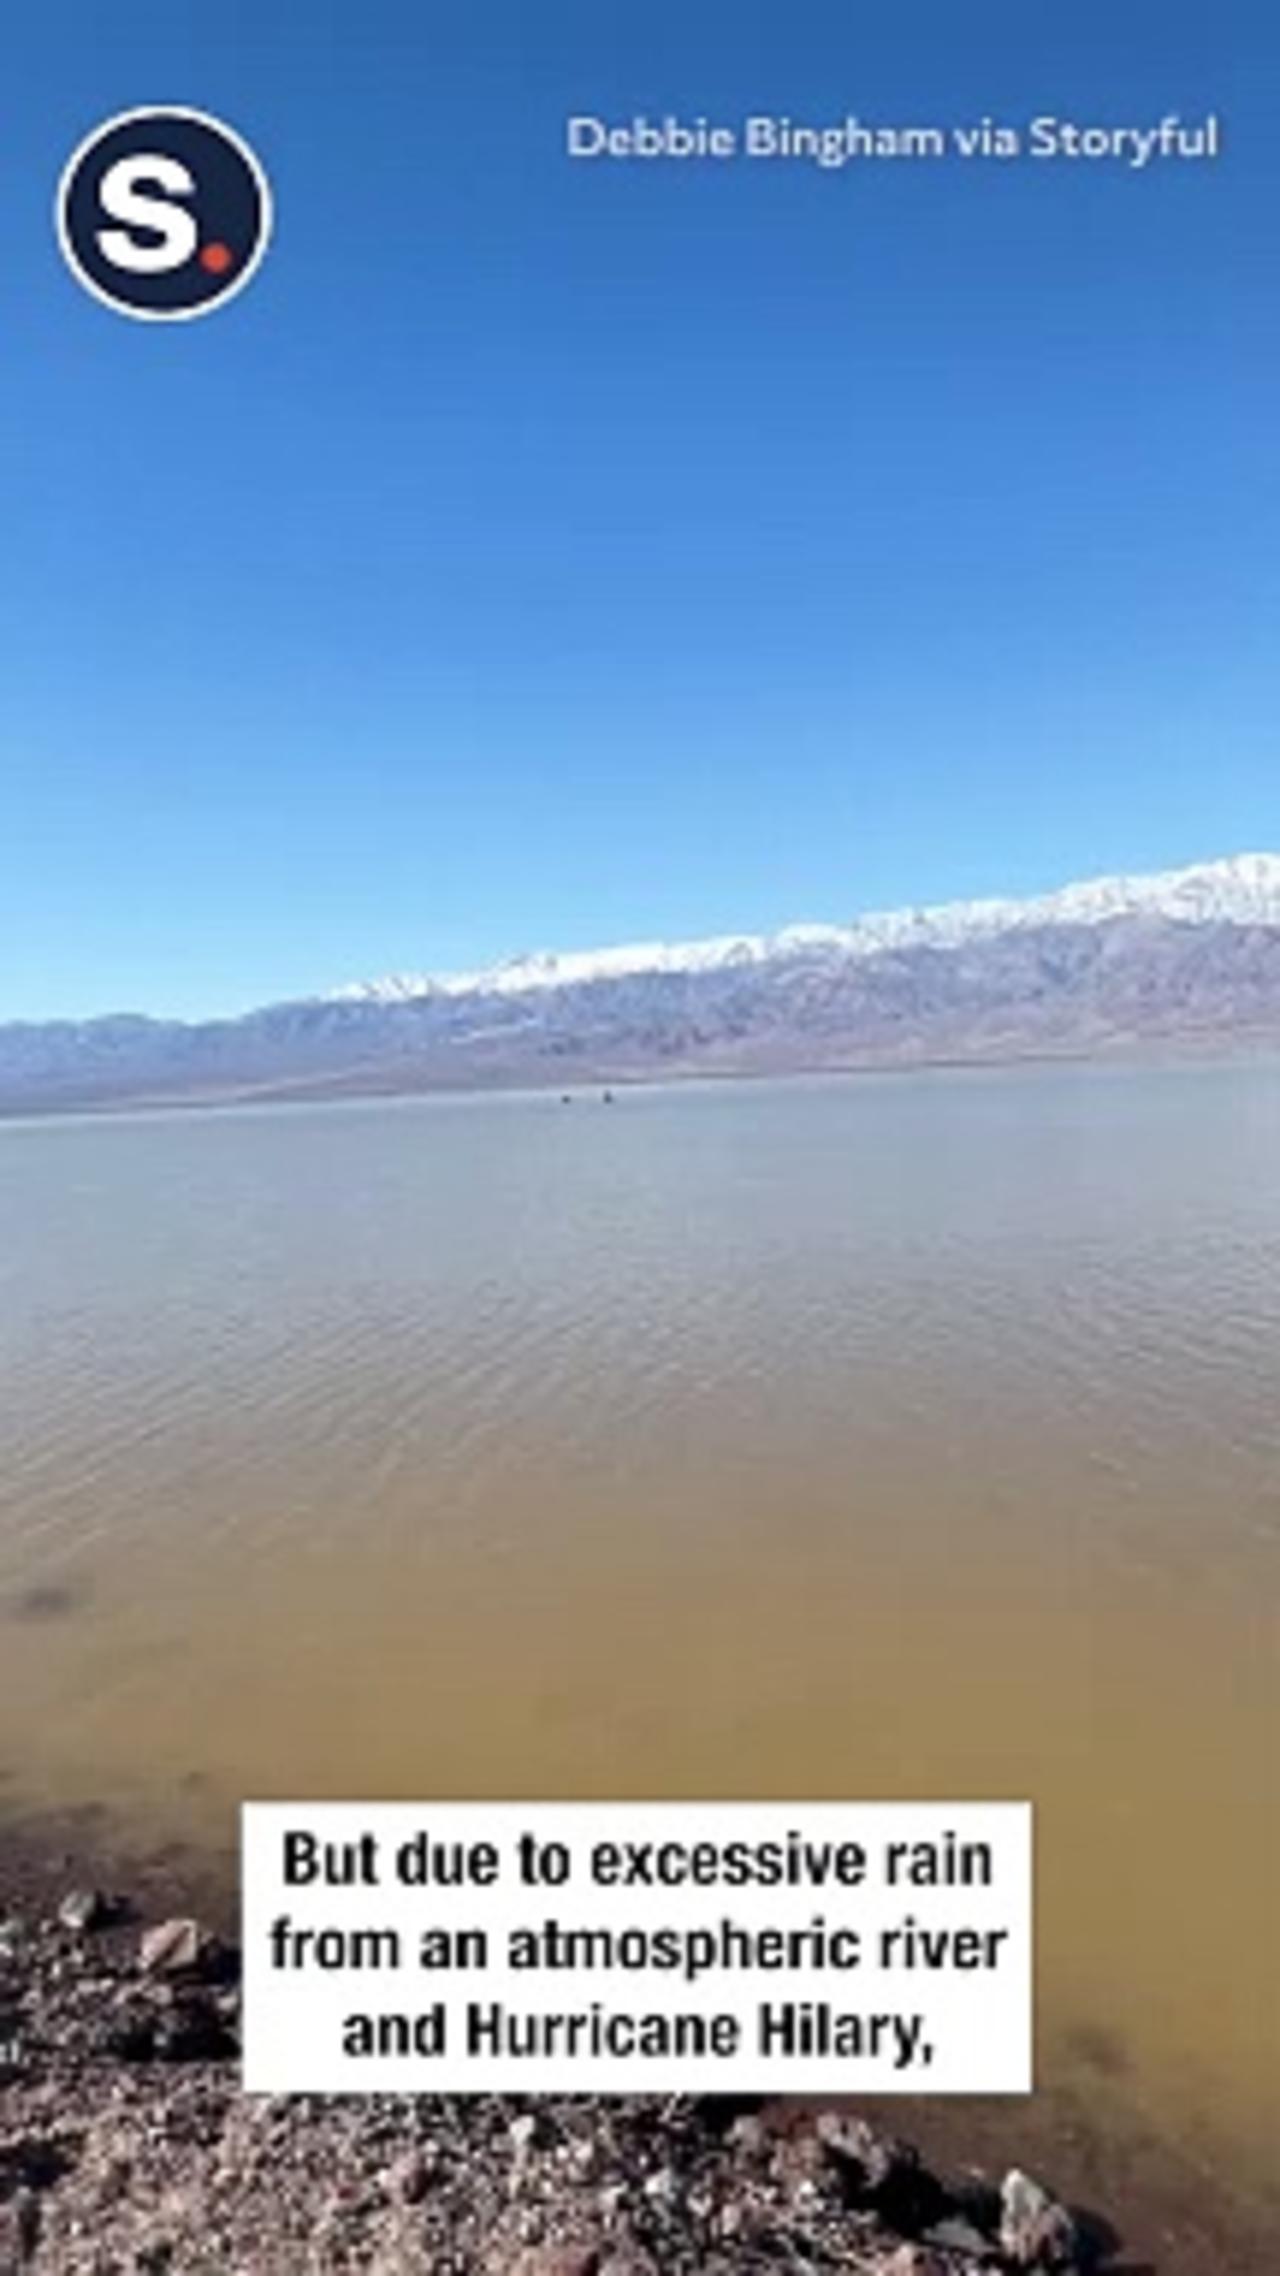 Kayakers Take Advantage of Temporary Lake in Death Valley